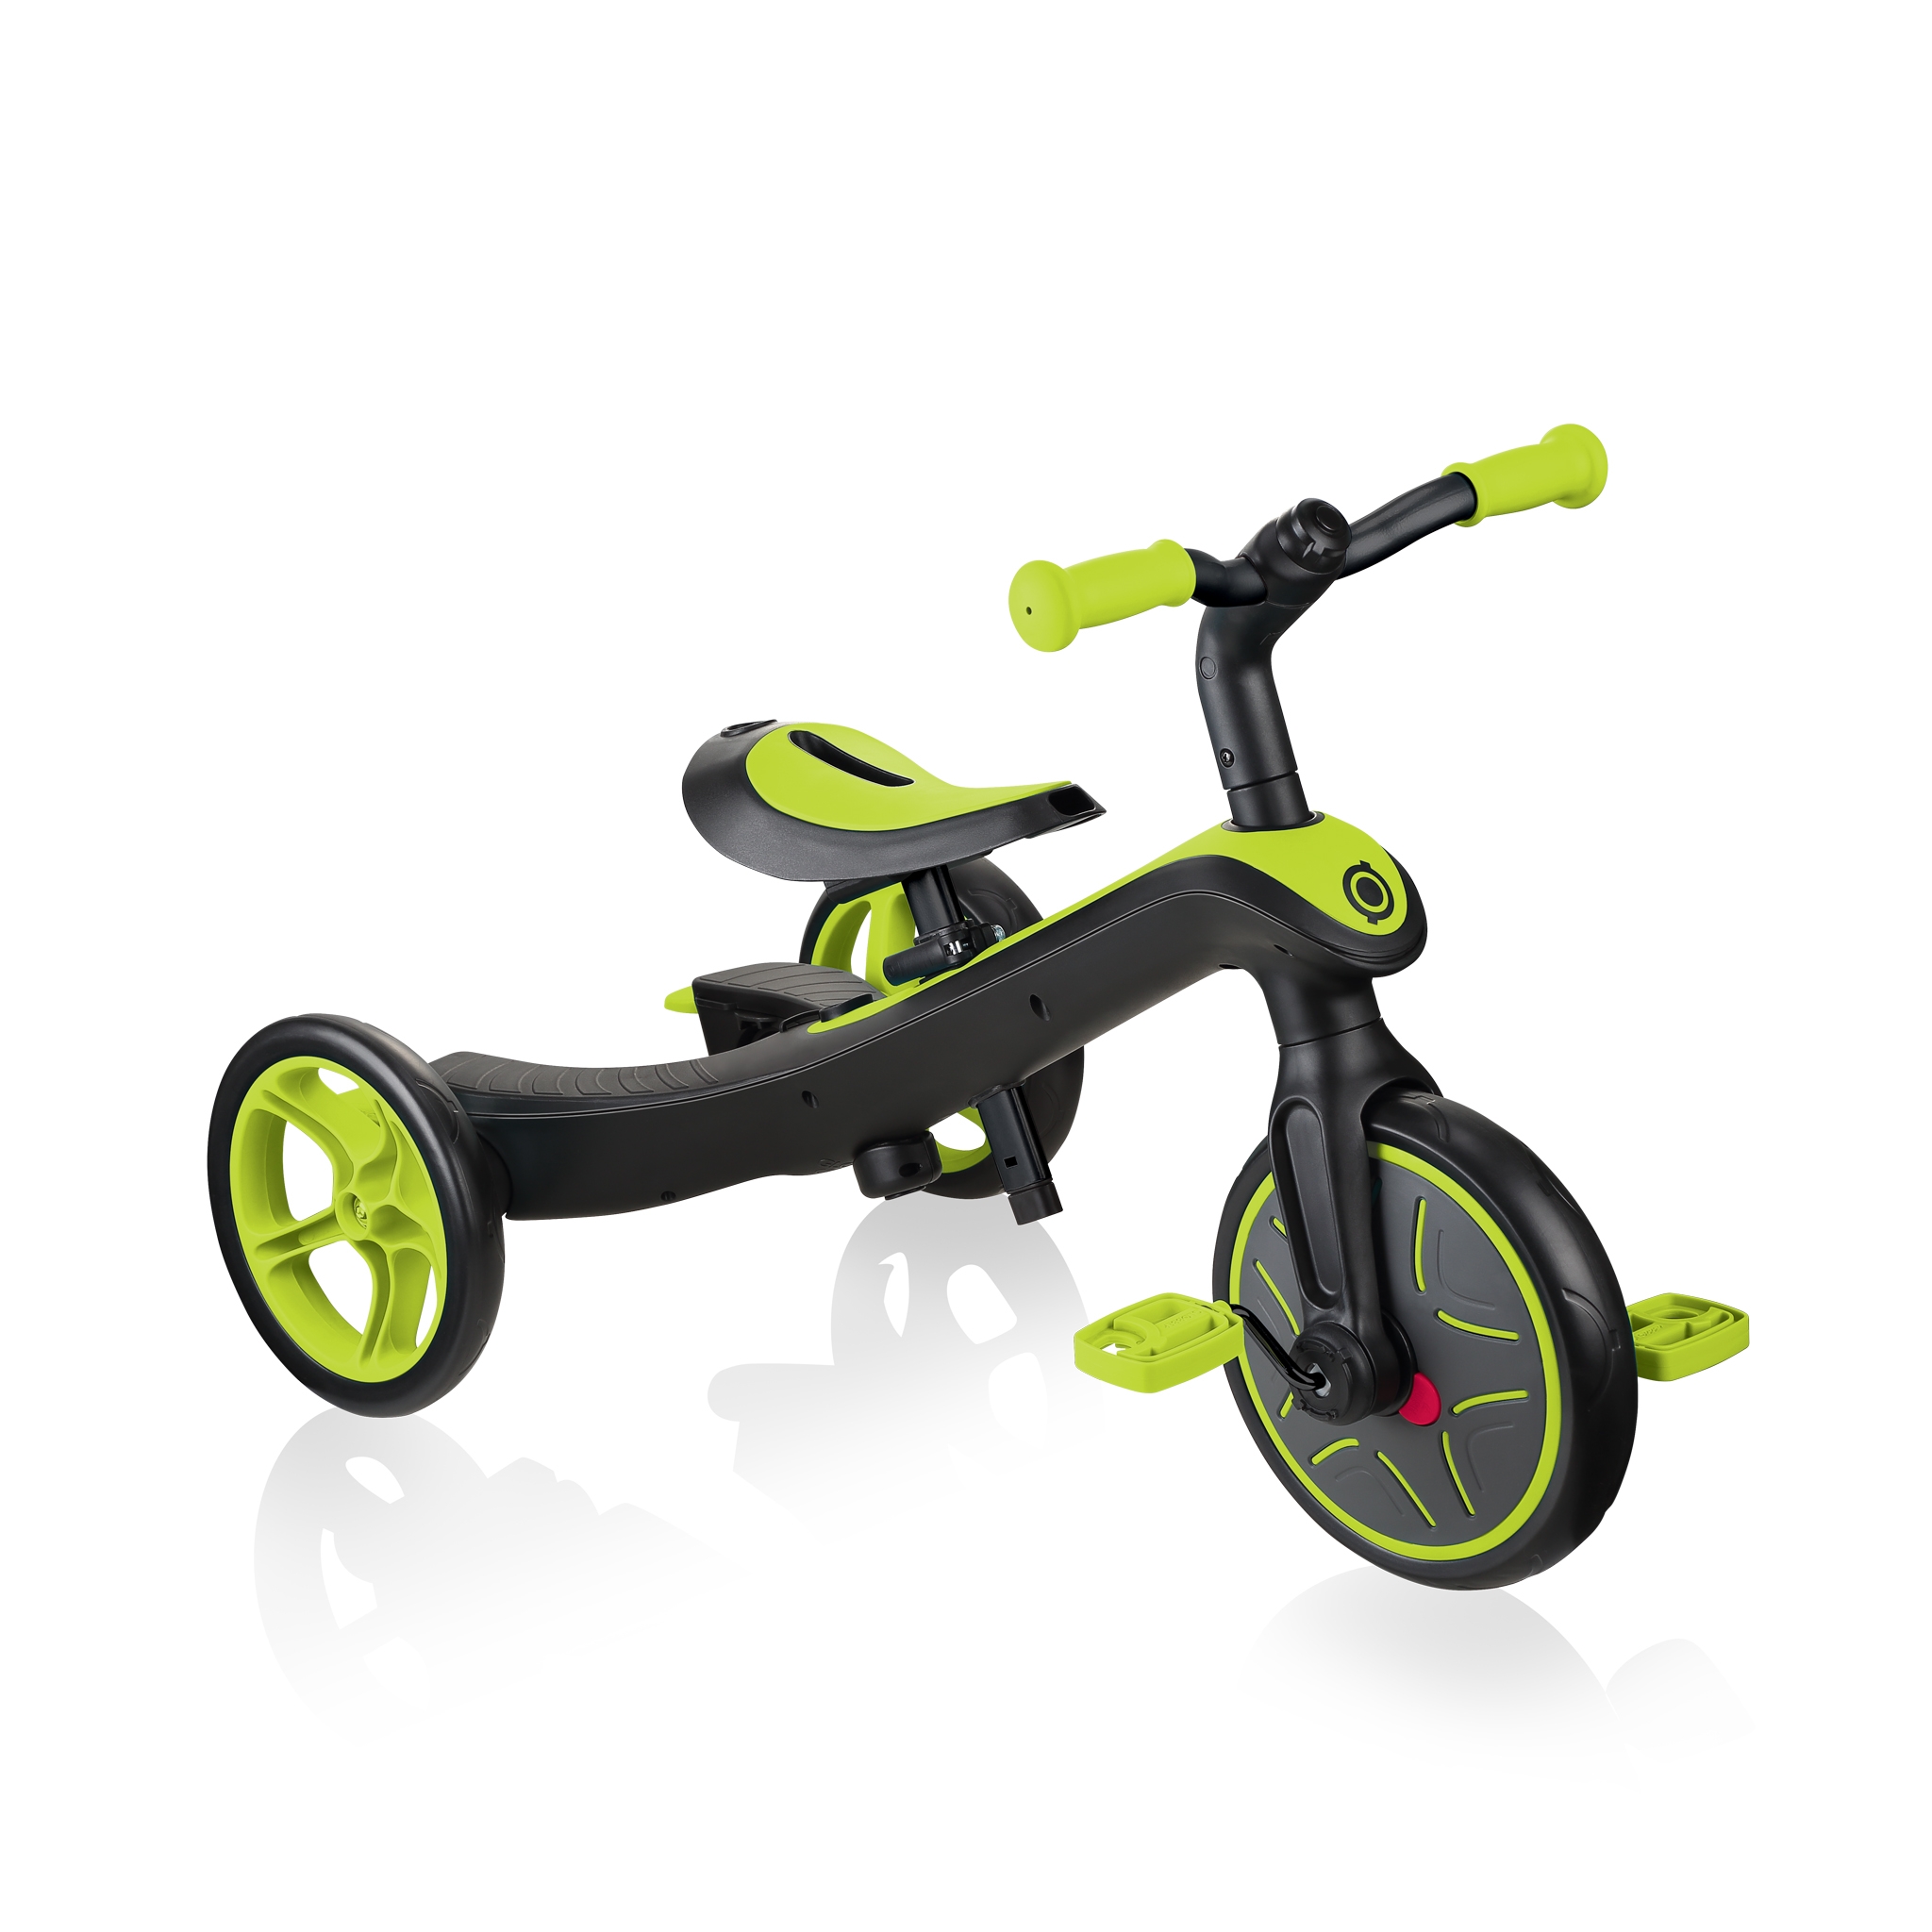 Globber-EXPLORER-TRIKE-3in1-all-in-one-baby-tricycle-and-kids-balance-bike-stage-2-training-trike 1